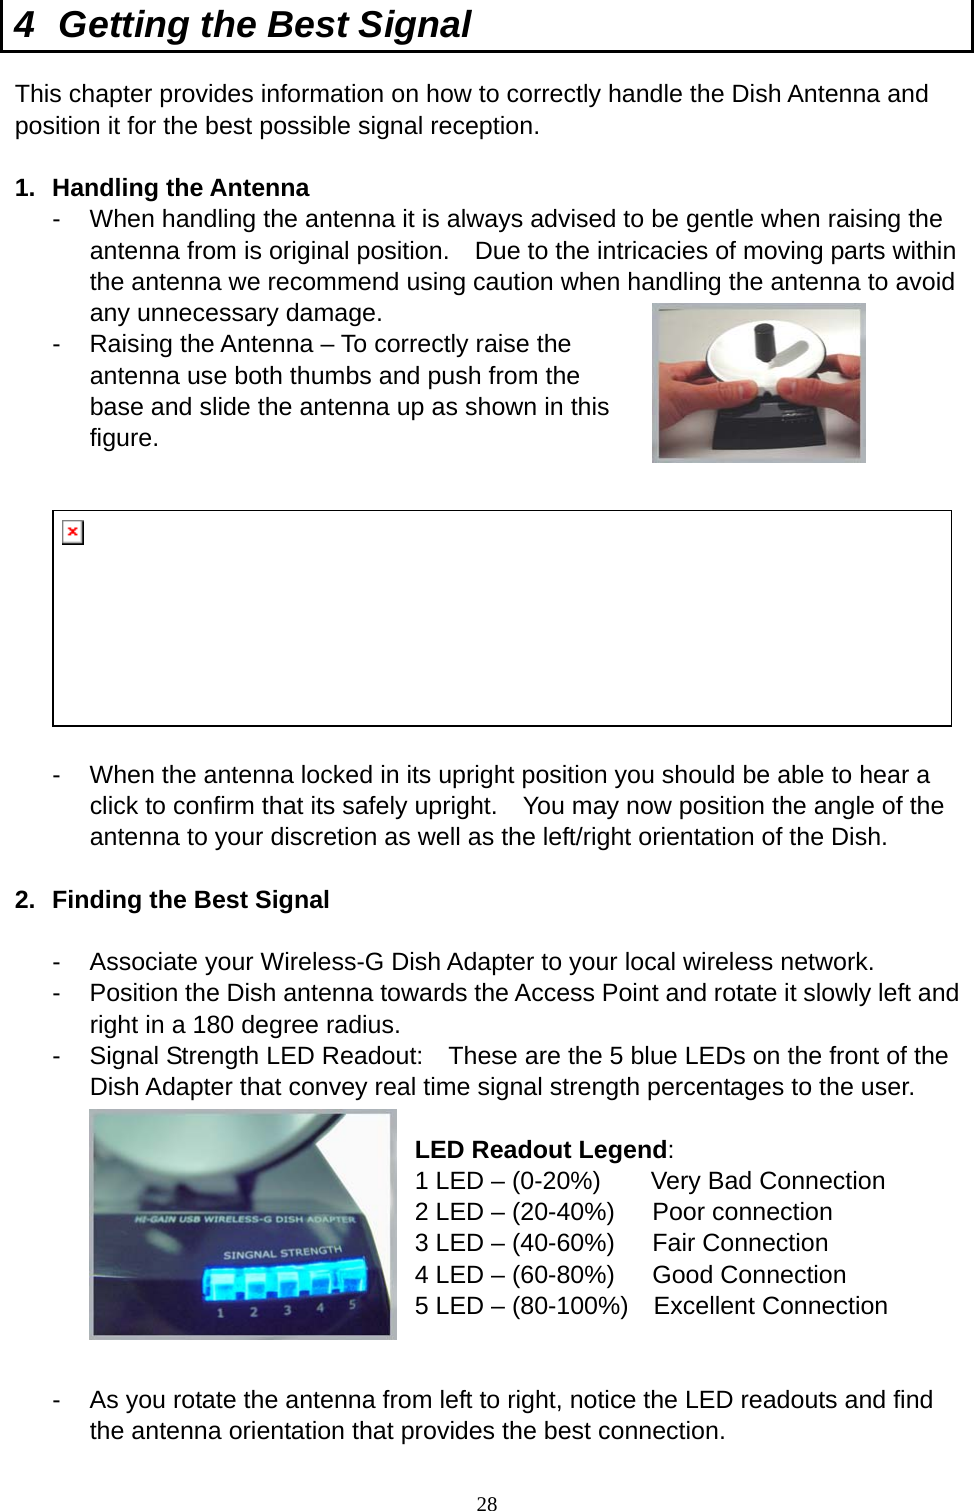  28 4  Getting the Best Signal This chapter provides information on how to correctly handle the Dish Antenna and position it for the best possible signal reception.  1. Handling the Antenna -  When handling the antenna it is always advised to be gentle when raising the antenna from is original position.    Due to the intricacies of moving parts within the antenna we recommend using caution when handling the antenna to avoid any unnecessary damage.     -  Raising the Antenna – To correctly raise the antenna use both thumbs and push from the base and slide the antenna up as shown in this figure.   -  When the antenna locked in its upright position you should be able to hear a click to confirm that its safely upright.    You may now position the angle of the antenna to your discretion as well as the left/right orientation of the Dish.      2.  Finding the Best Signal  -  Associate your Wireless-G Dish Adapter to your local wireless network. -  Position the Dish antenna towards the Access Point and rotate it slowly left and right in a 180 degree radius.     -  Signal Strength LED Readout:    These are the 5 blue LEDs on the front of the Dish Adapter that convey real time signal strength percentages to the user.  LED Readout Legend: 1 LED – (0-20%)        Very Bad Connection   2 LED – (20-40%)      Poor connection 3 LED – (40-60%)      Fair Connection 4 LED – (60-80%)      Good Connection 5 LED – (80-100%)    Excellent Connection   -  As you rotate the antenna from left to right, notice the LED readouts and find the antenna orientation that provides the best connection. 